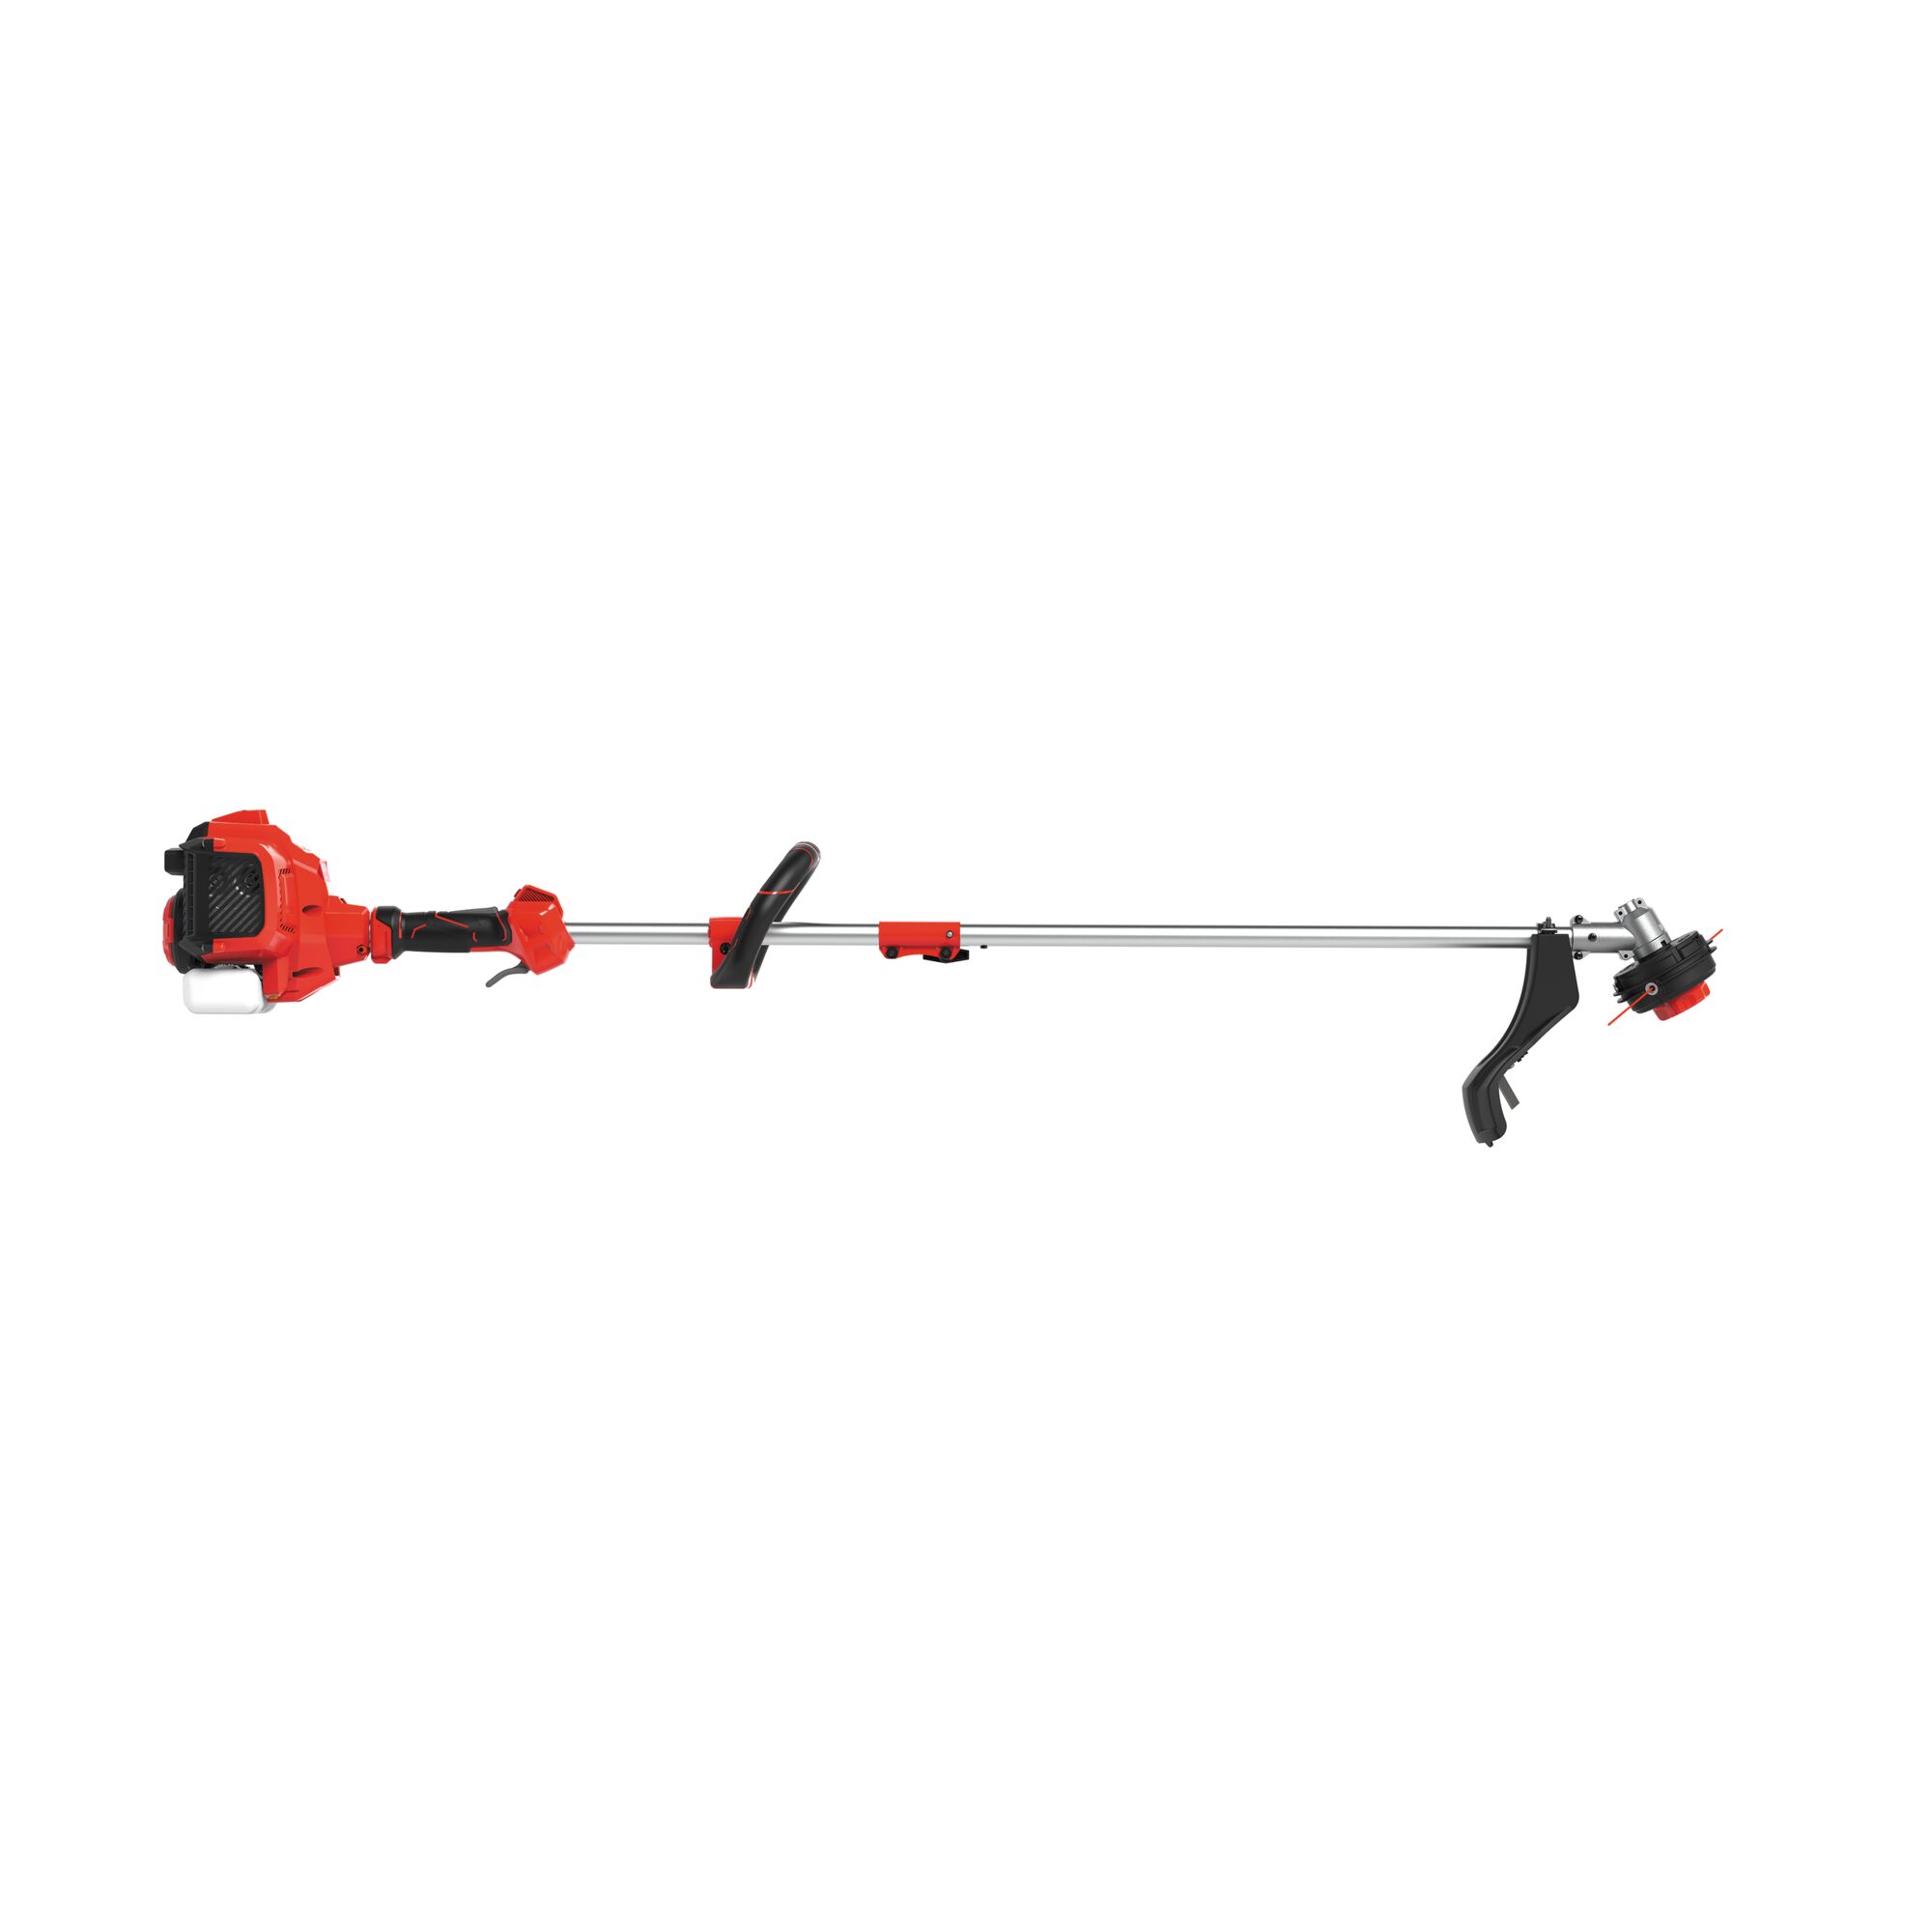 Profile of Weedwacker 27 C C 2 cycle 18 inch attachment capable straight shaft gas trimmer.